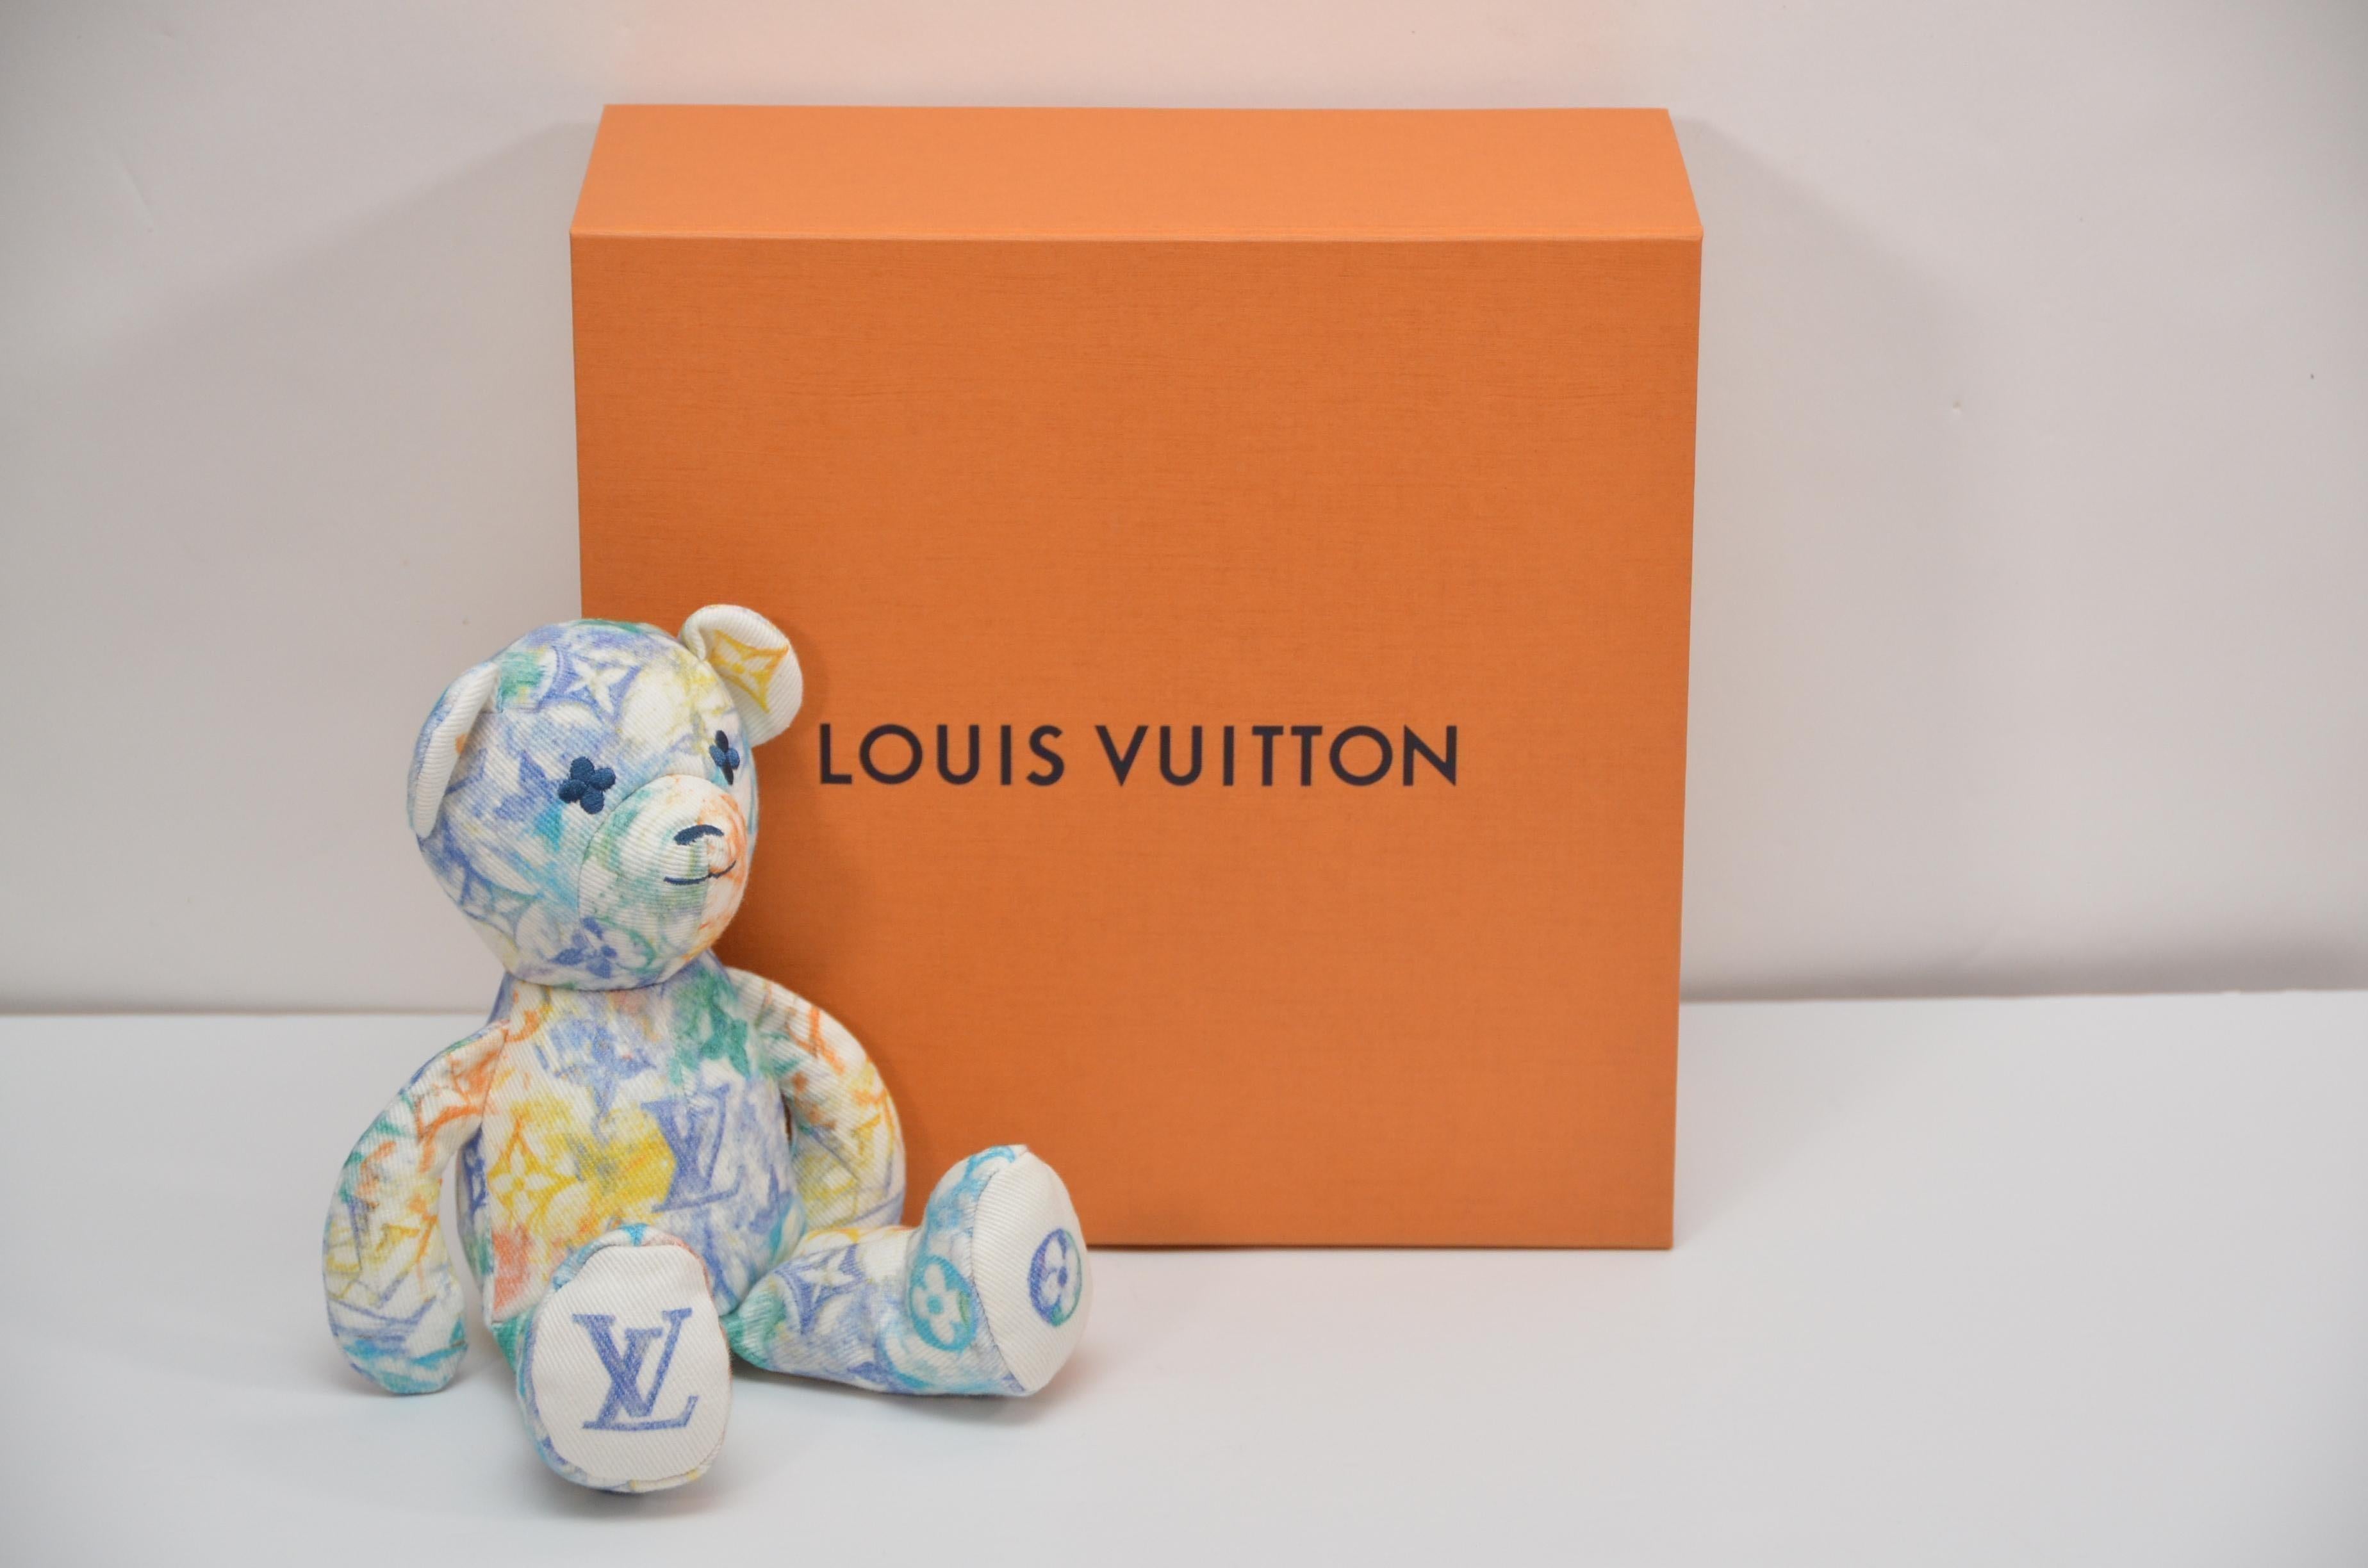 Part of the Louis Vuitton for Unicef partnership, this soft Doudou Louis toy is a warm and meaningful new addition to the gifting collection. It is crafted from organic cotton and showcases distinctive House motifs such as the LV signature and